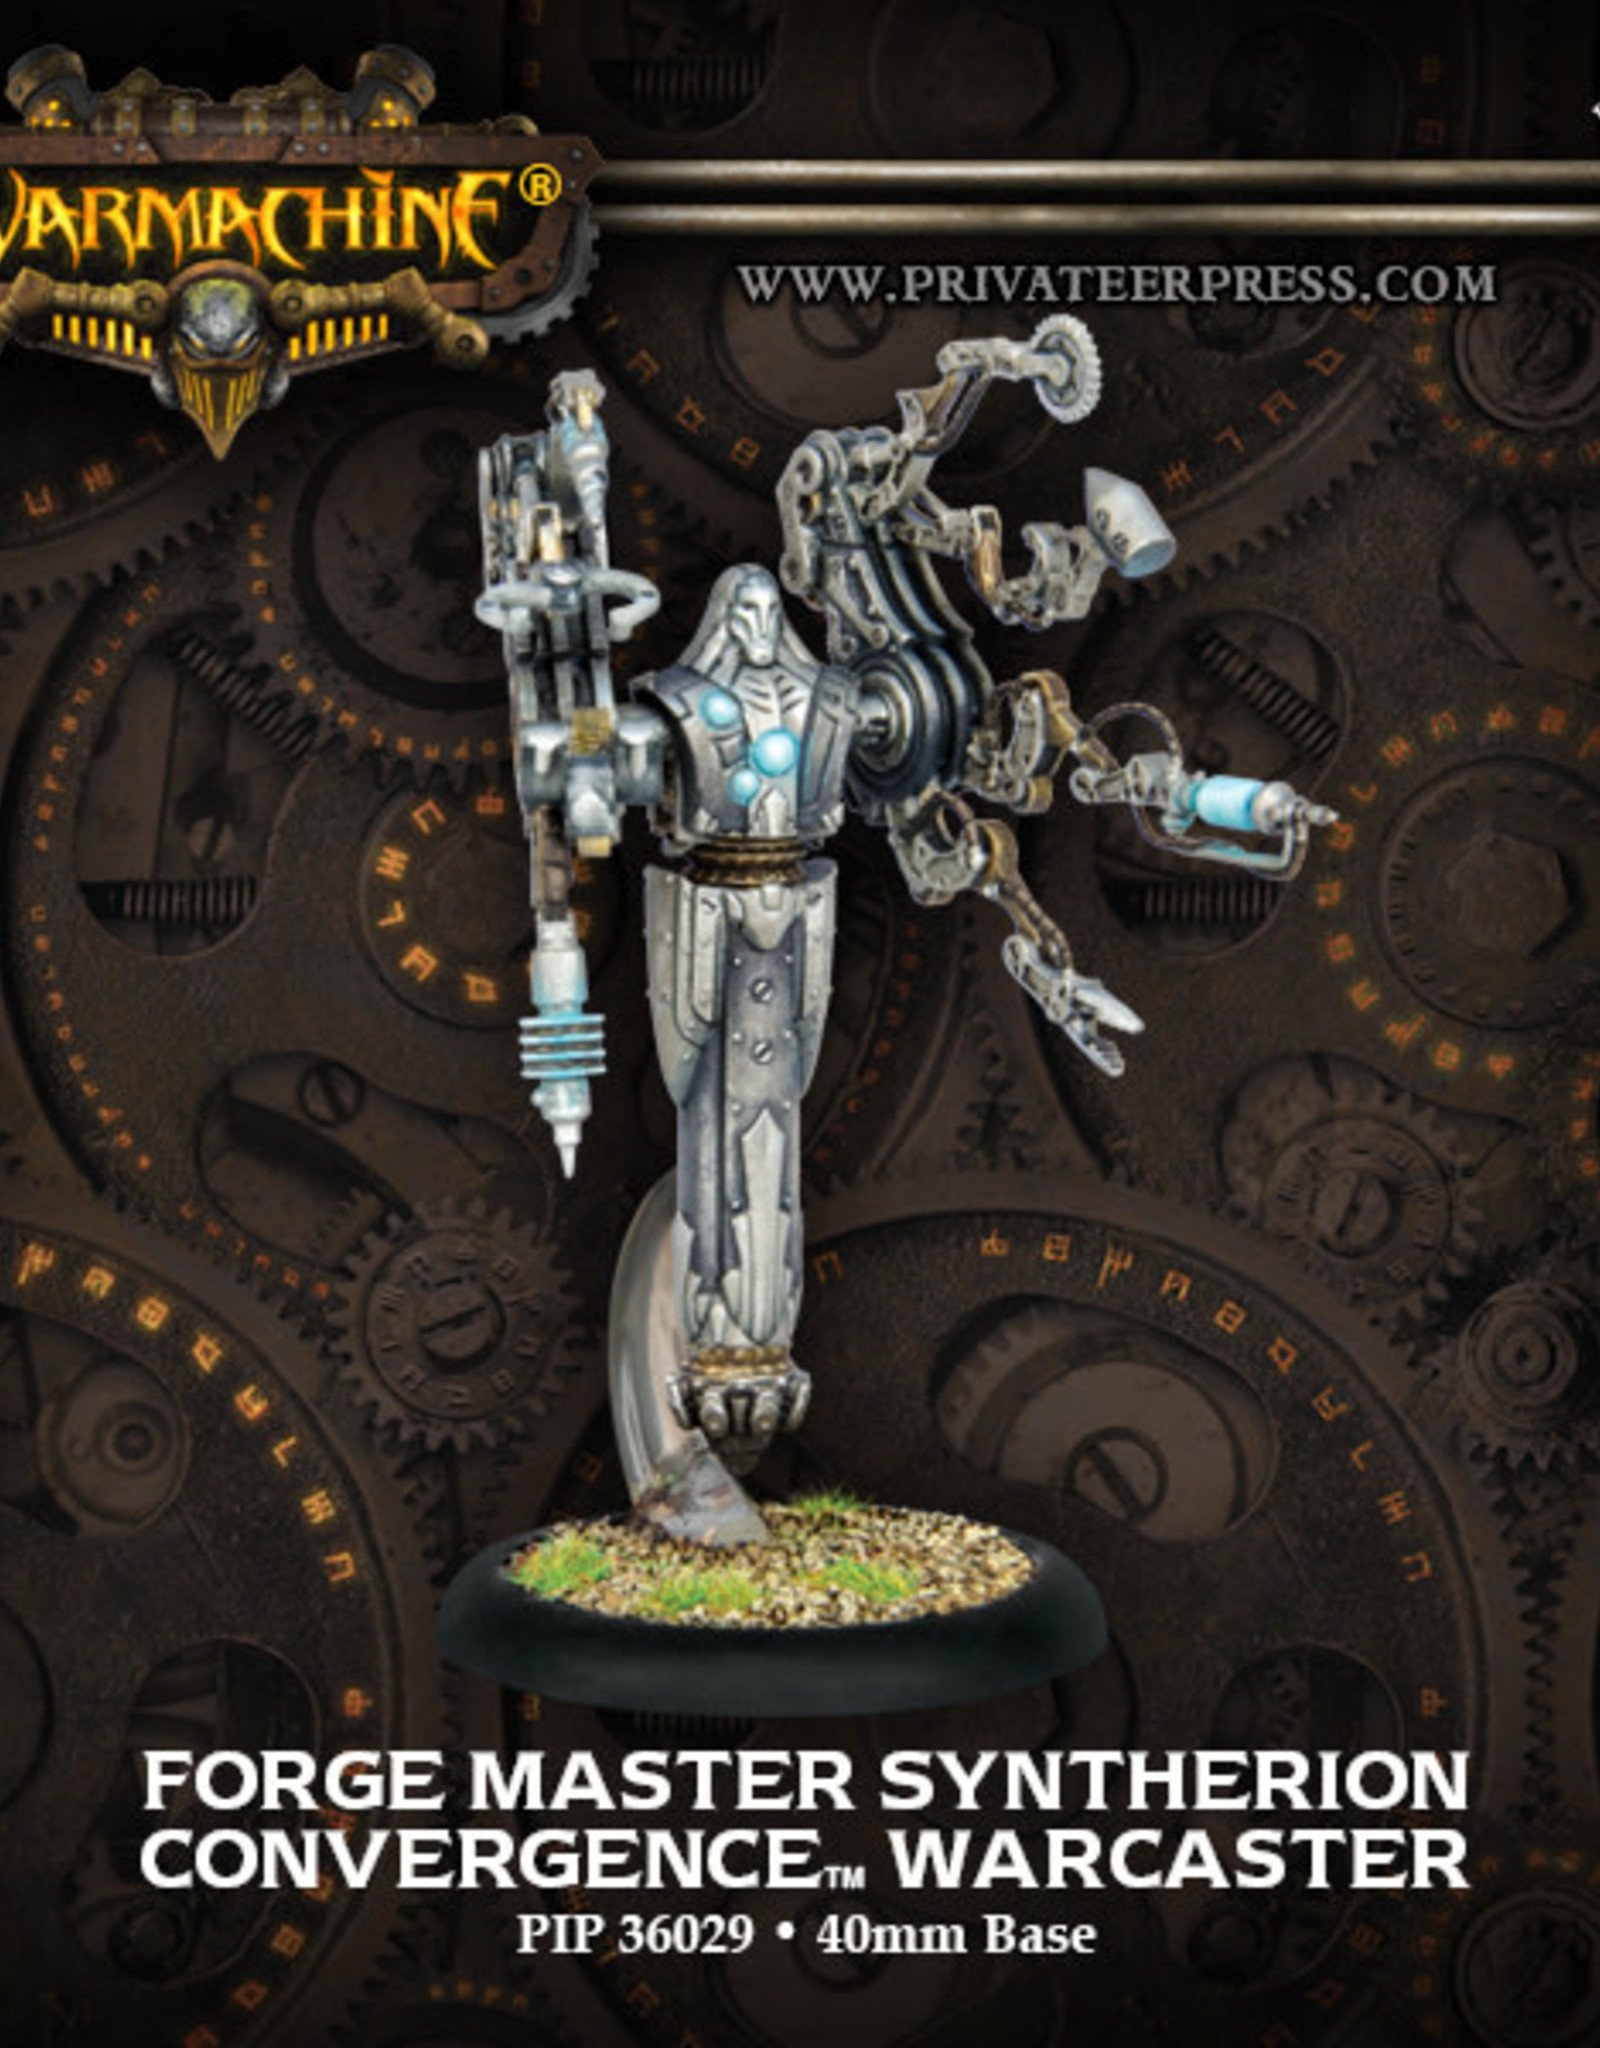 Warmachine Cyriss - Forge Master Syntherion